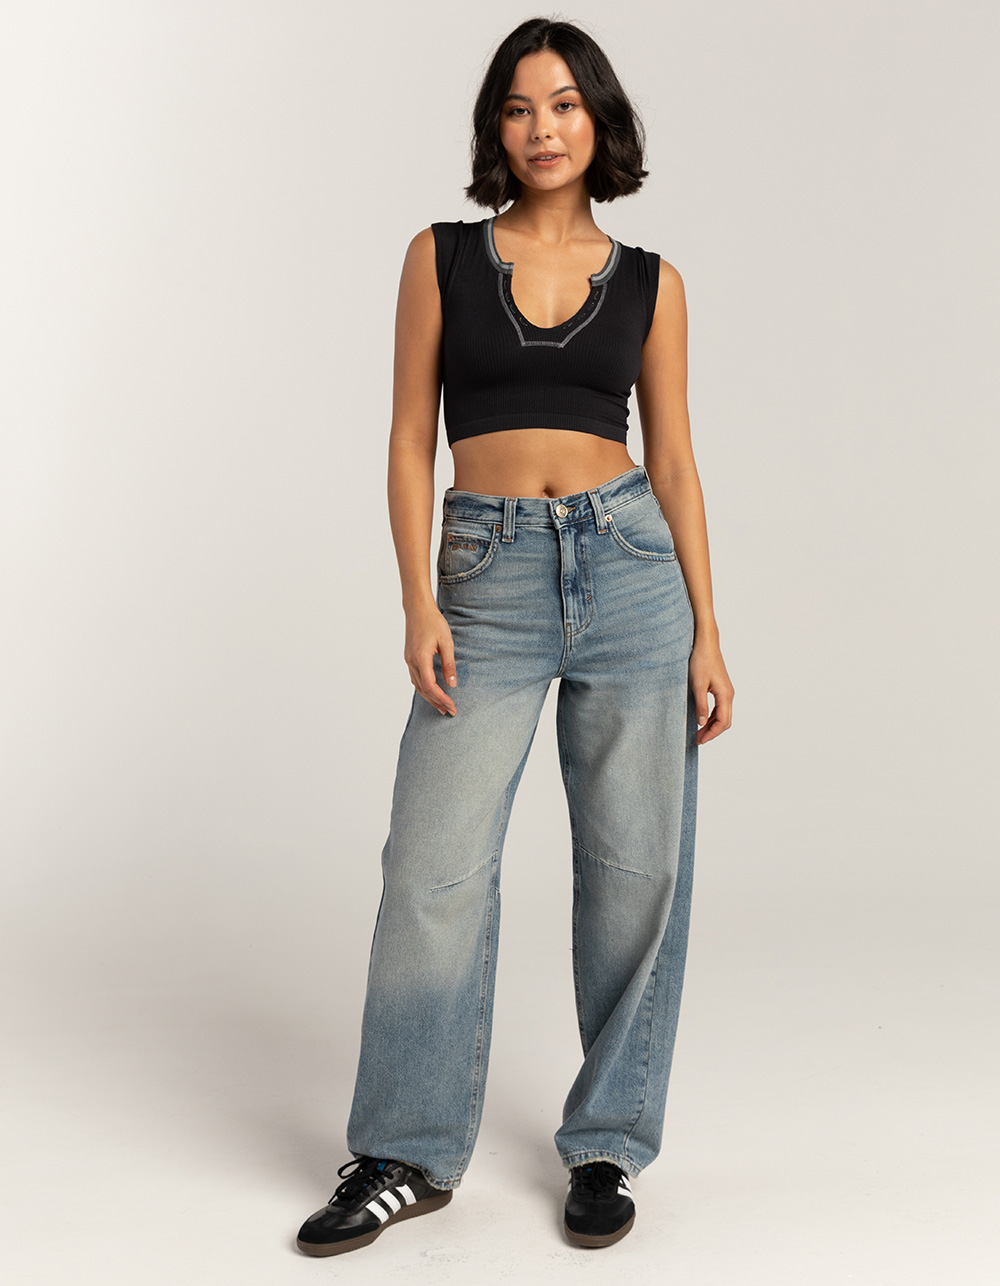 BDG Urban Outfitters Logan Arizona Dual Rise Loose Fit Womens Jeans